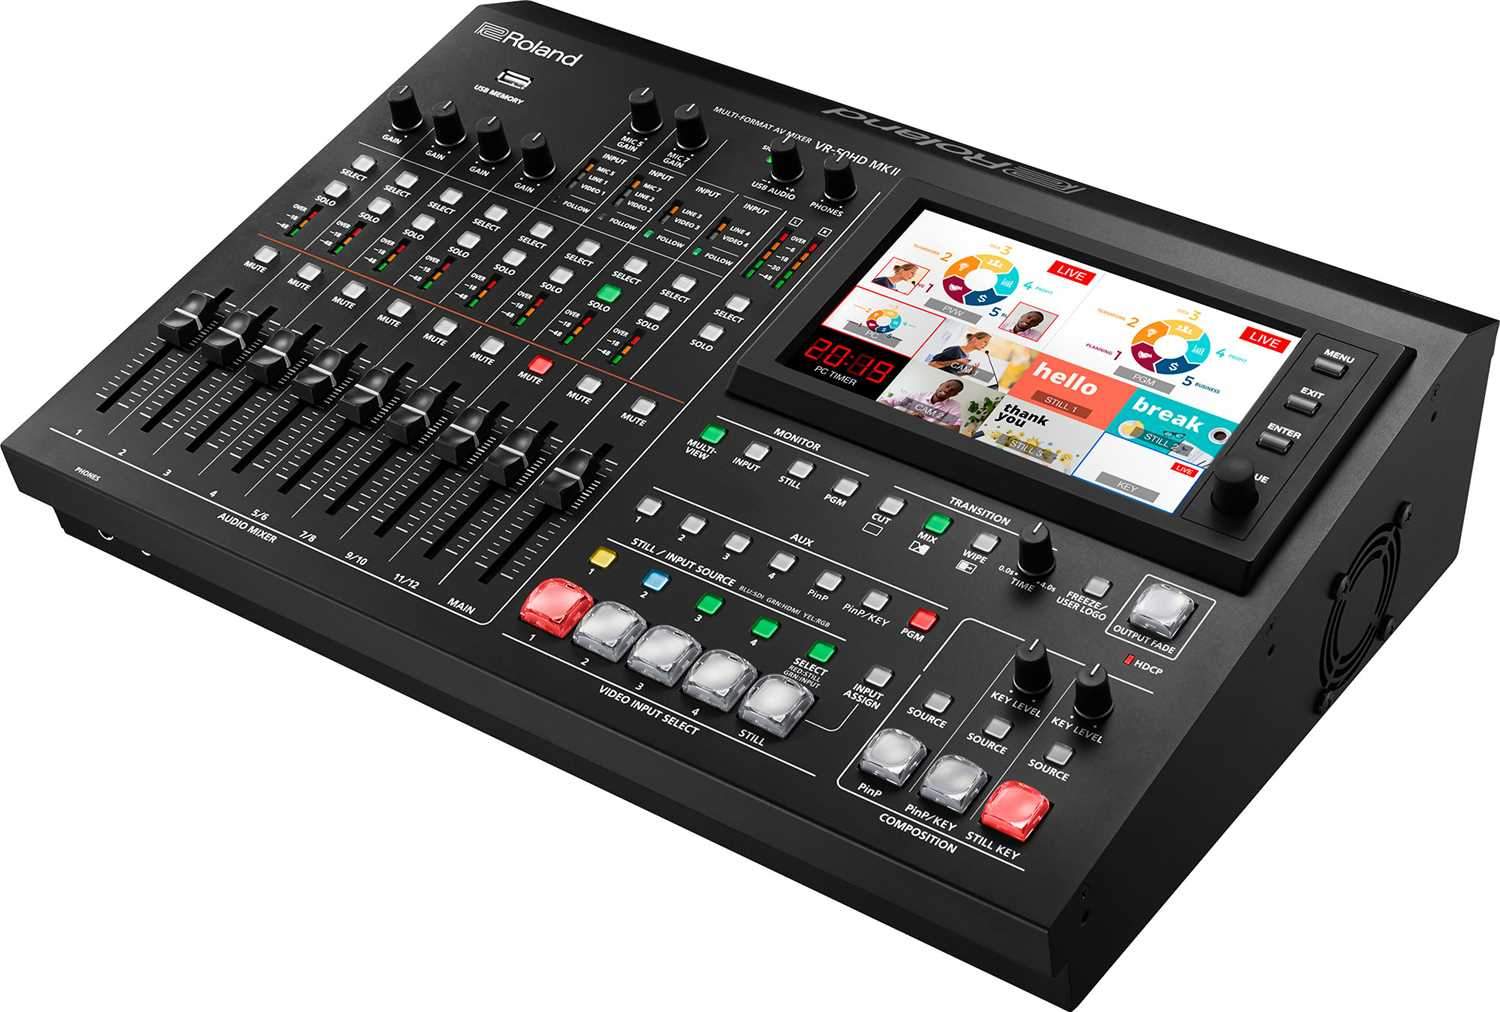 Roland VR-50HD MK II USB Streaming Multi-Format A/V Mixer - PSSL ProSound and Stage Lighting